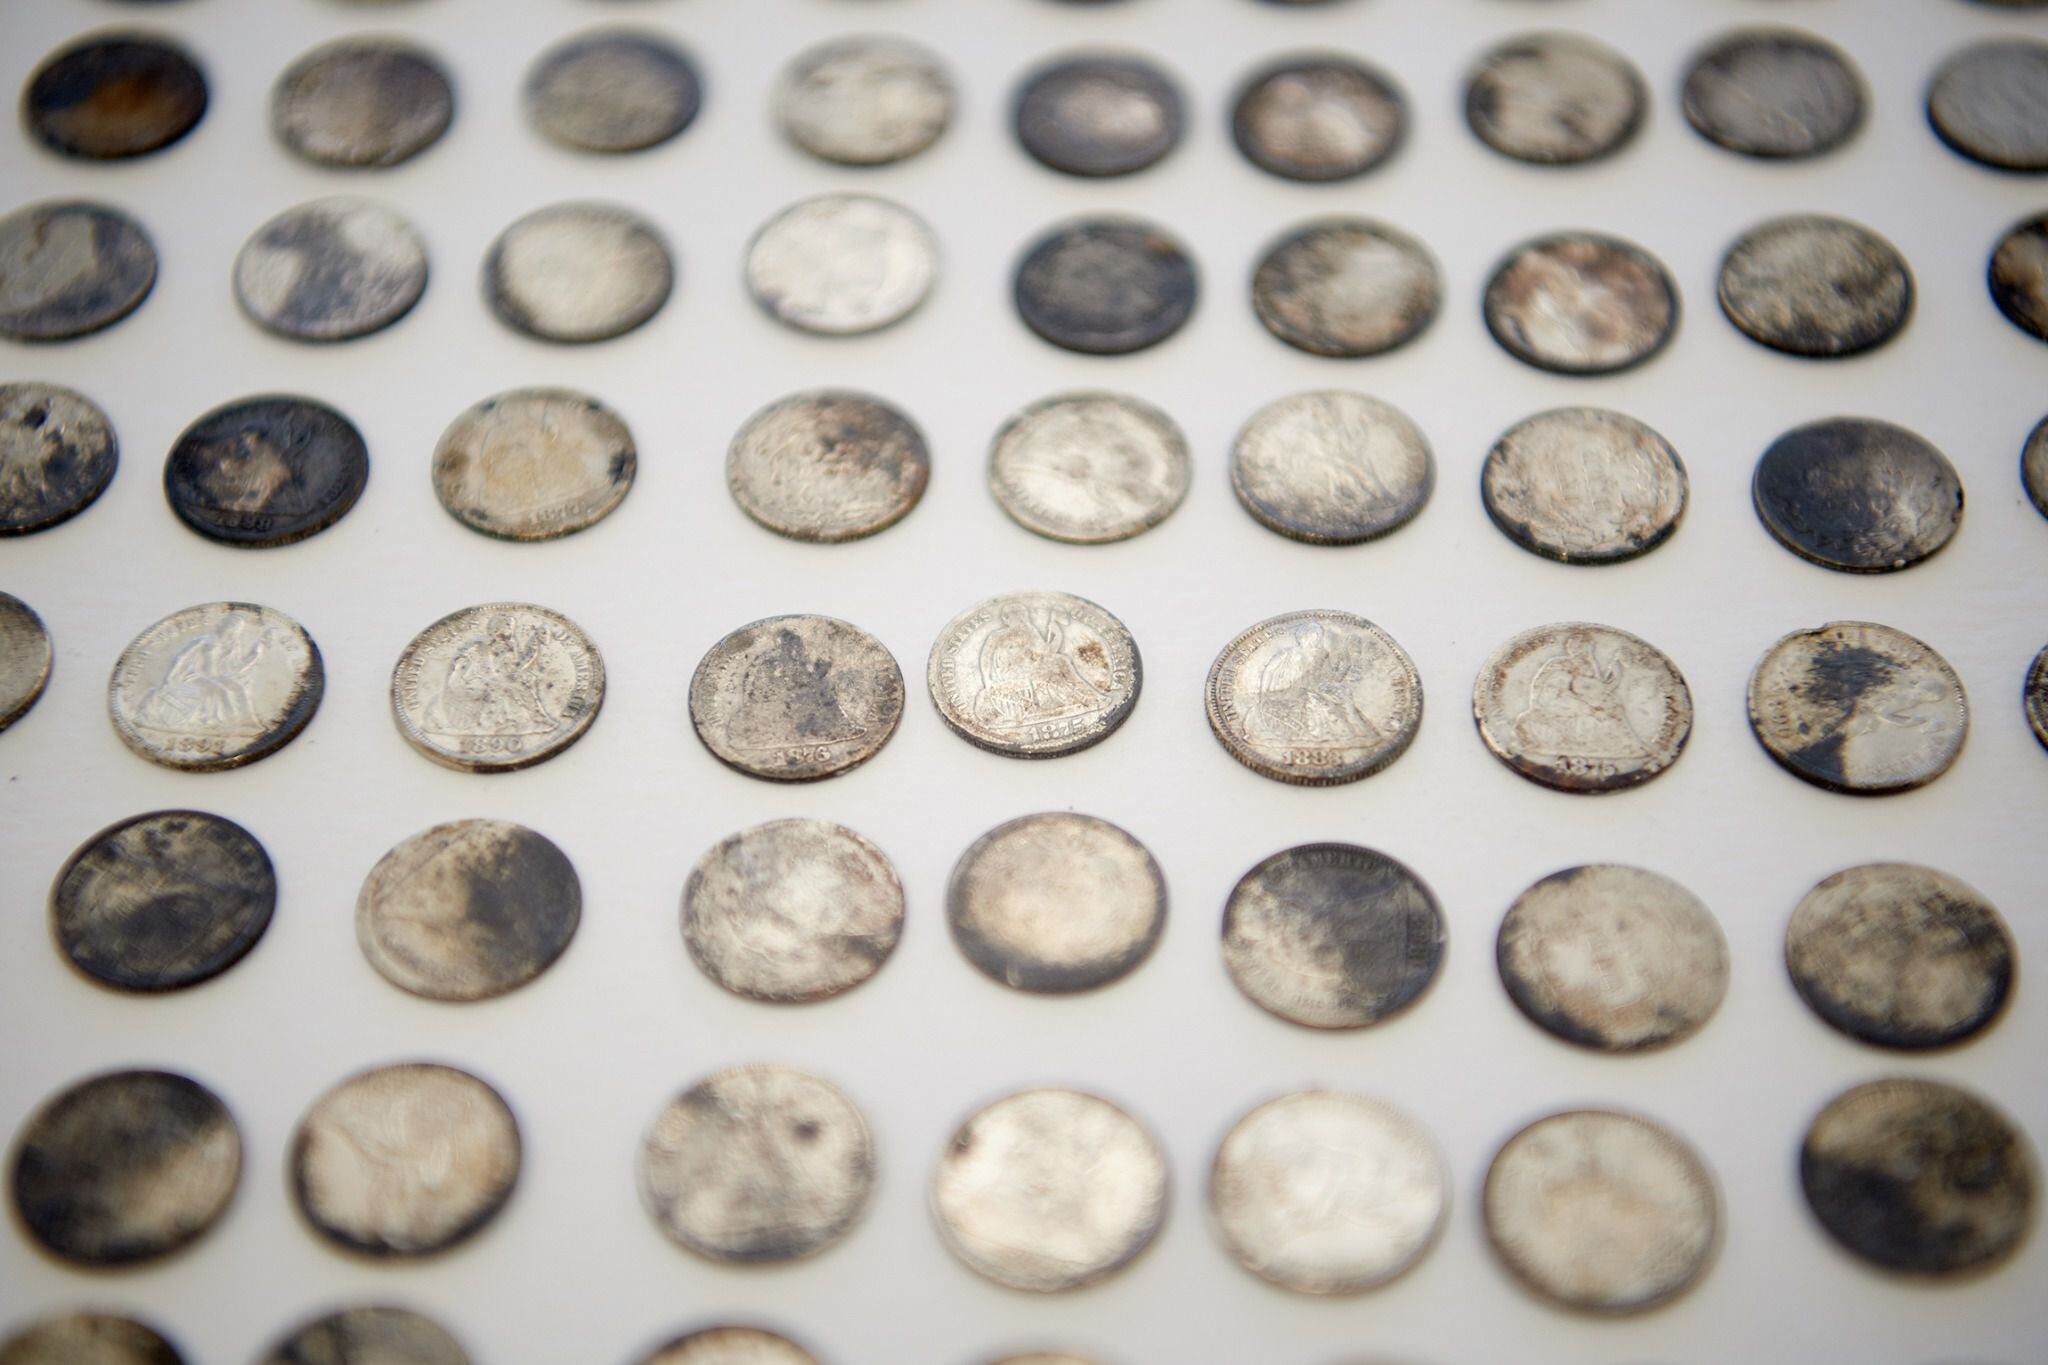 (photo courtesy The Church of Jesus Christ of Latter-day Saints) These coins were deposited in the capstone of the Salt Lake Temple on April 6, 1892. Some 400 coinsÑmostly nickels and dimes, some pennies, a few quartersÑhave been found inside the concrete.